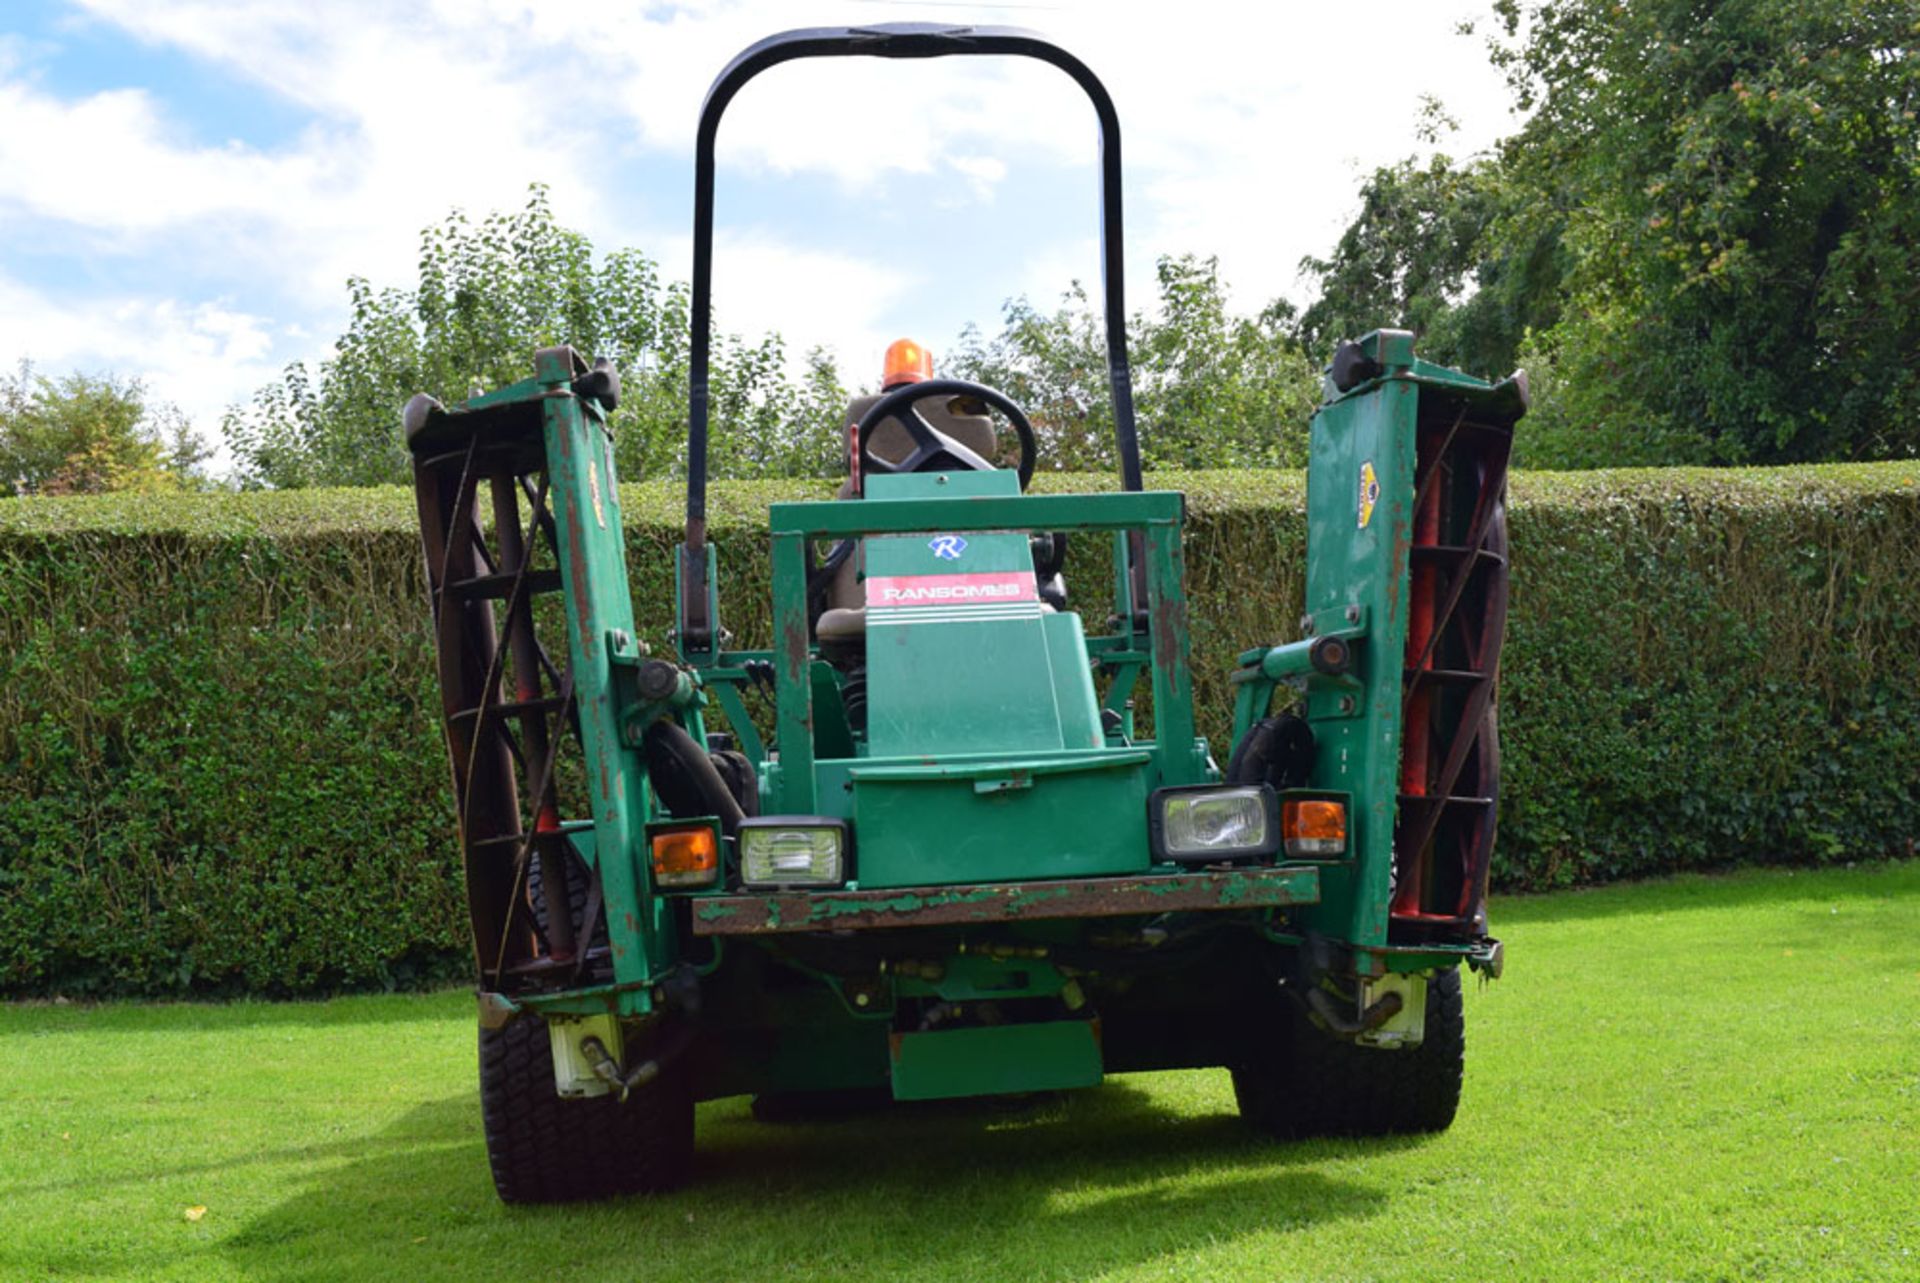 2003 Ransomes Parkway 2250 Plus Ride On Cylinder Mower